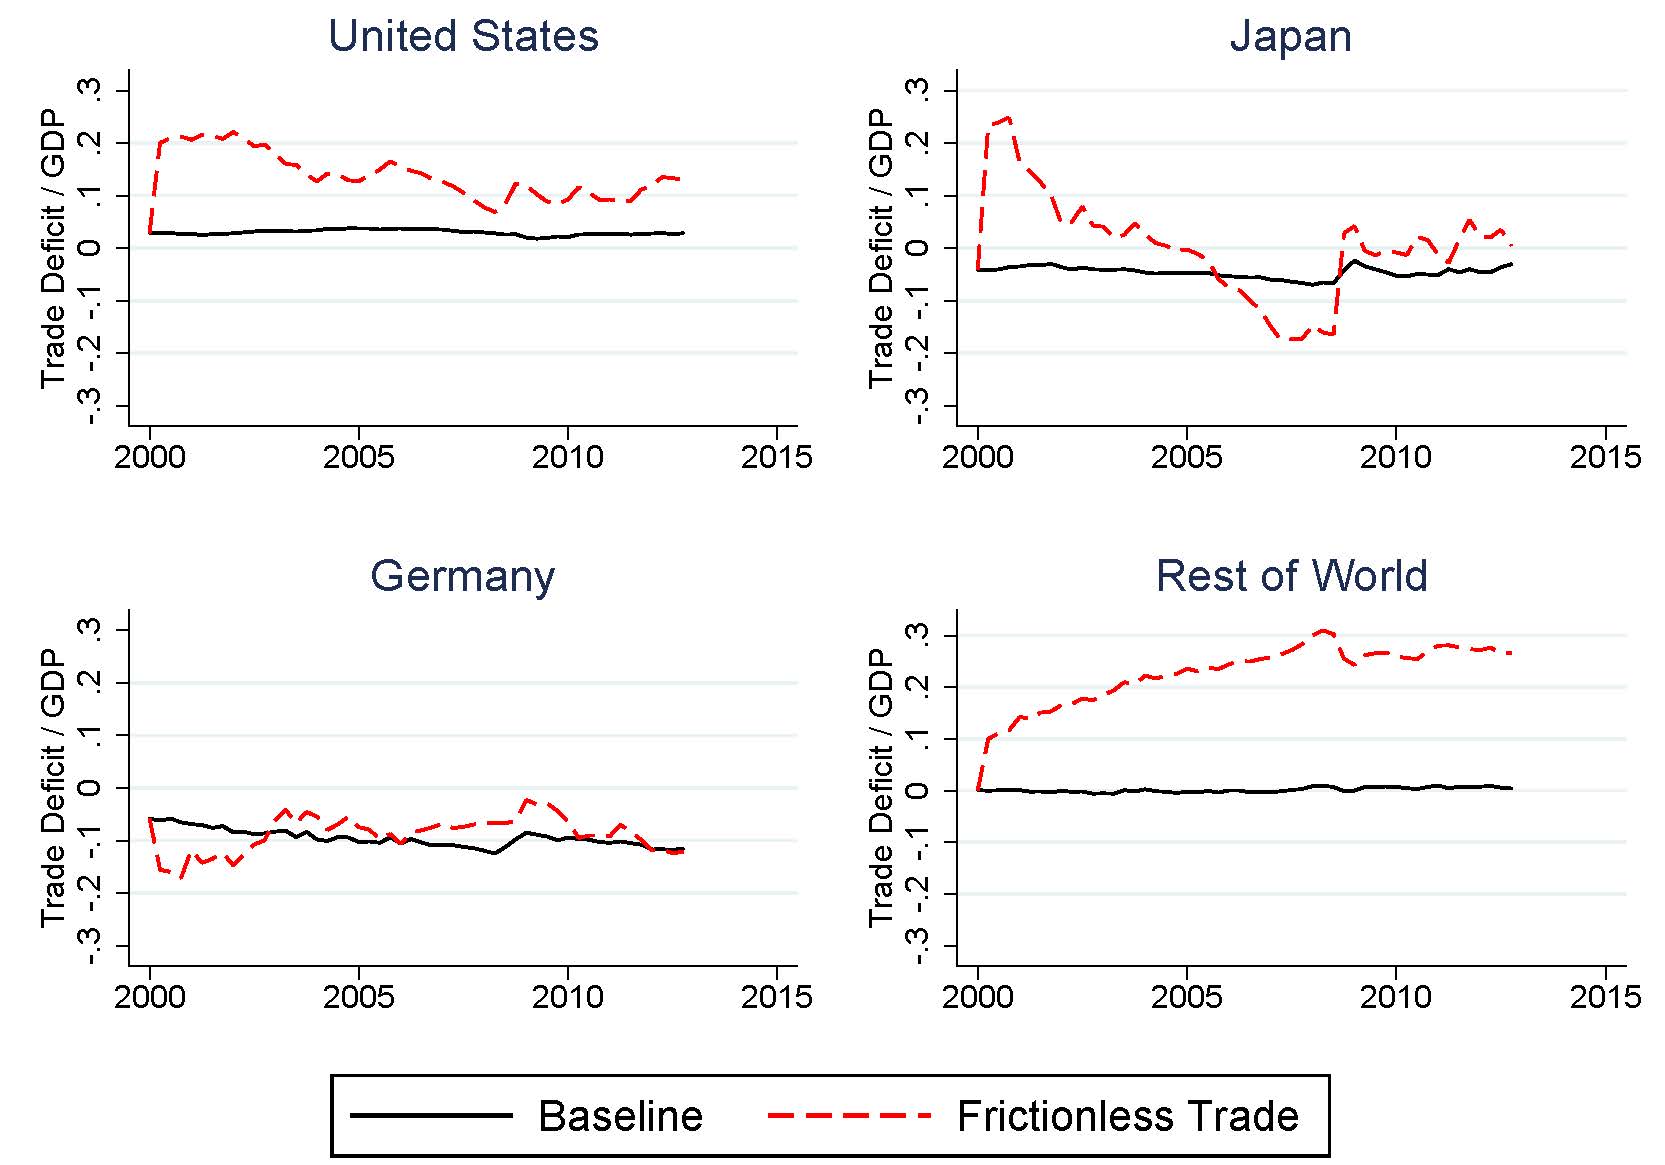 Figure of Trade Deficits / GDP in the Baseline and with Frictionless Trade for Selected Countries